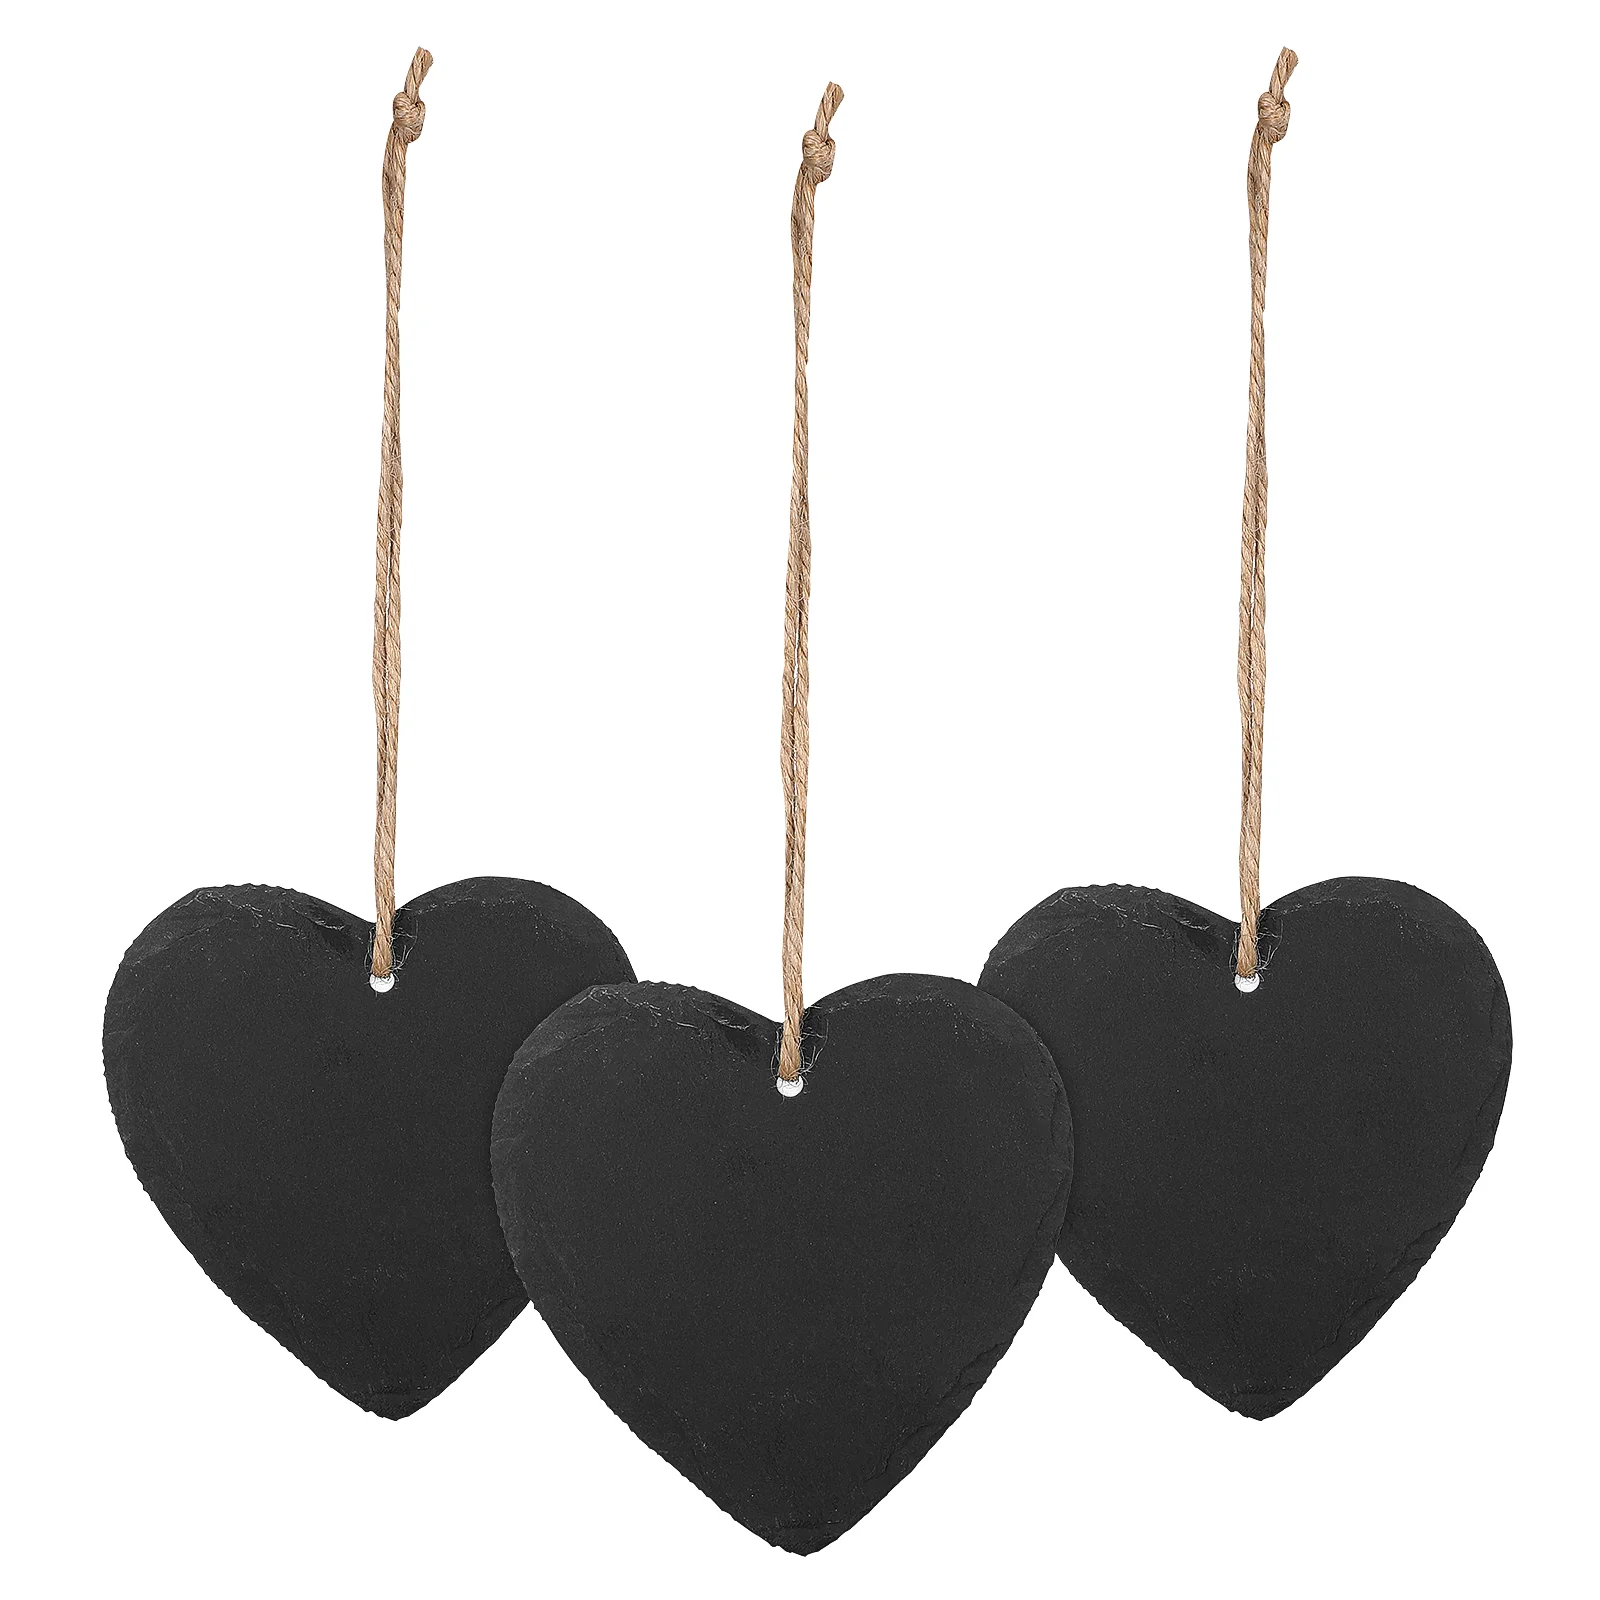 

3Pcs Slate Tags Heart Shape Hanging Chalkboard Labels Sign with Rope for Hanging